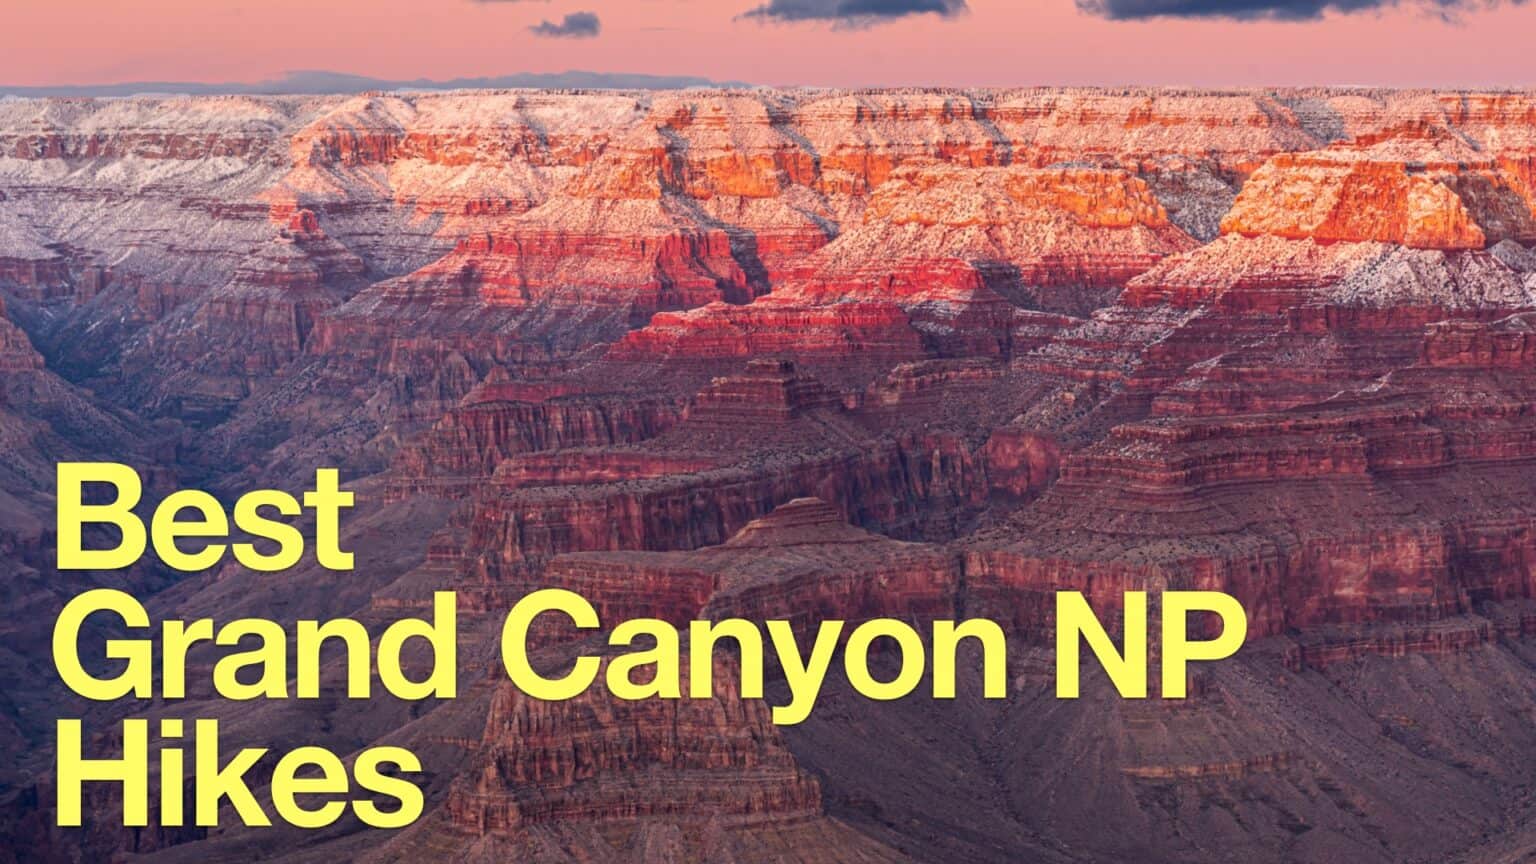 Grand Canyon Hikes For Families - HikingGuy.com